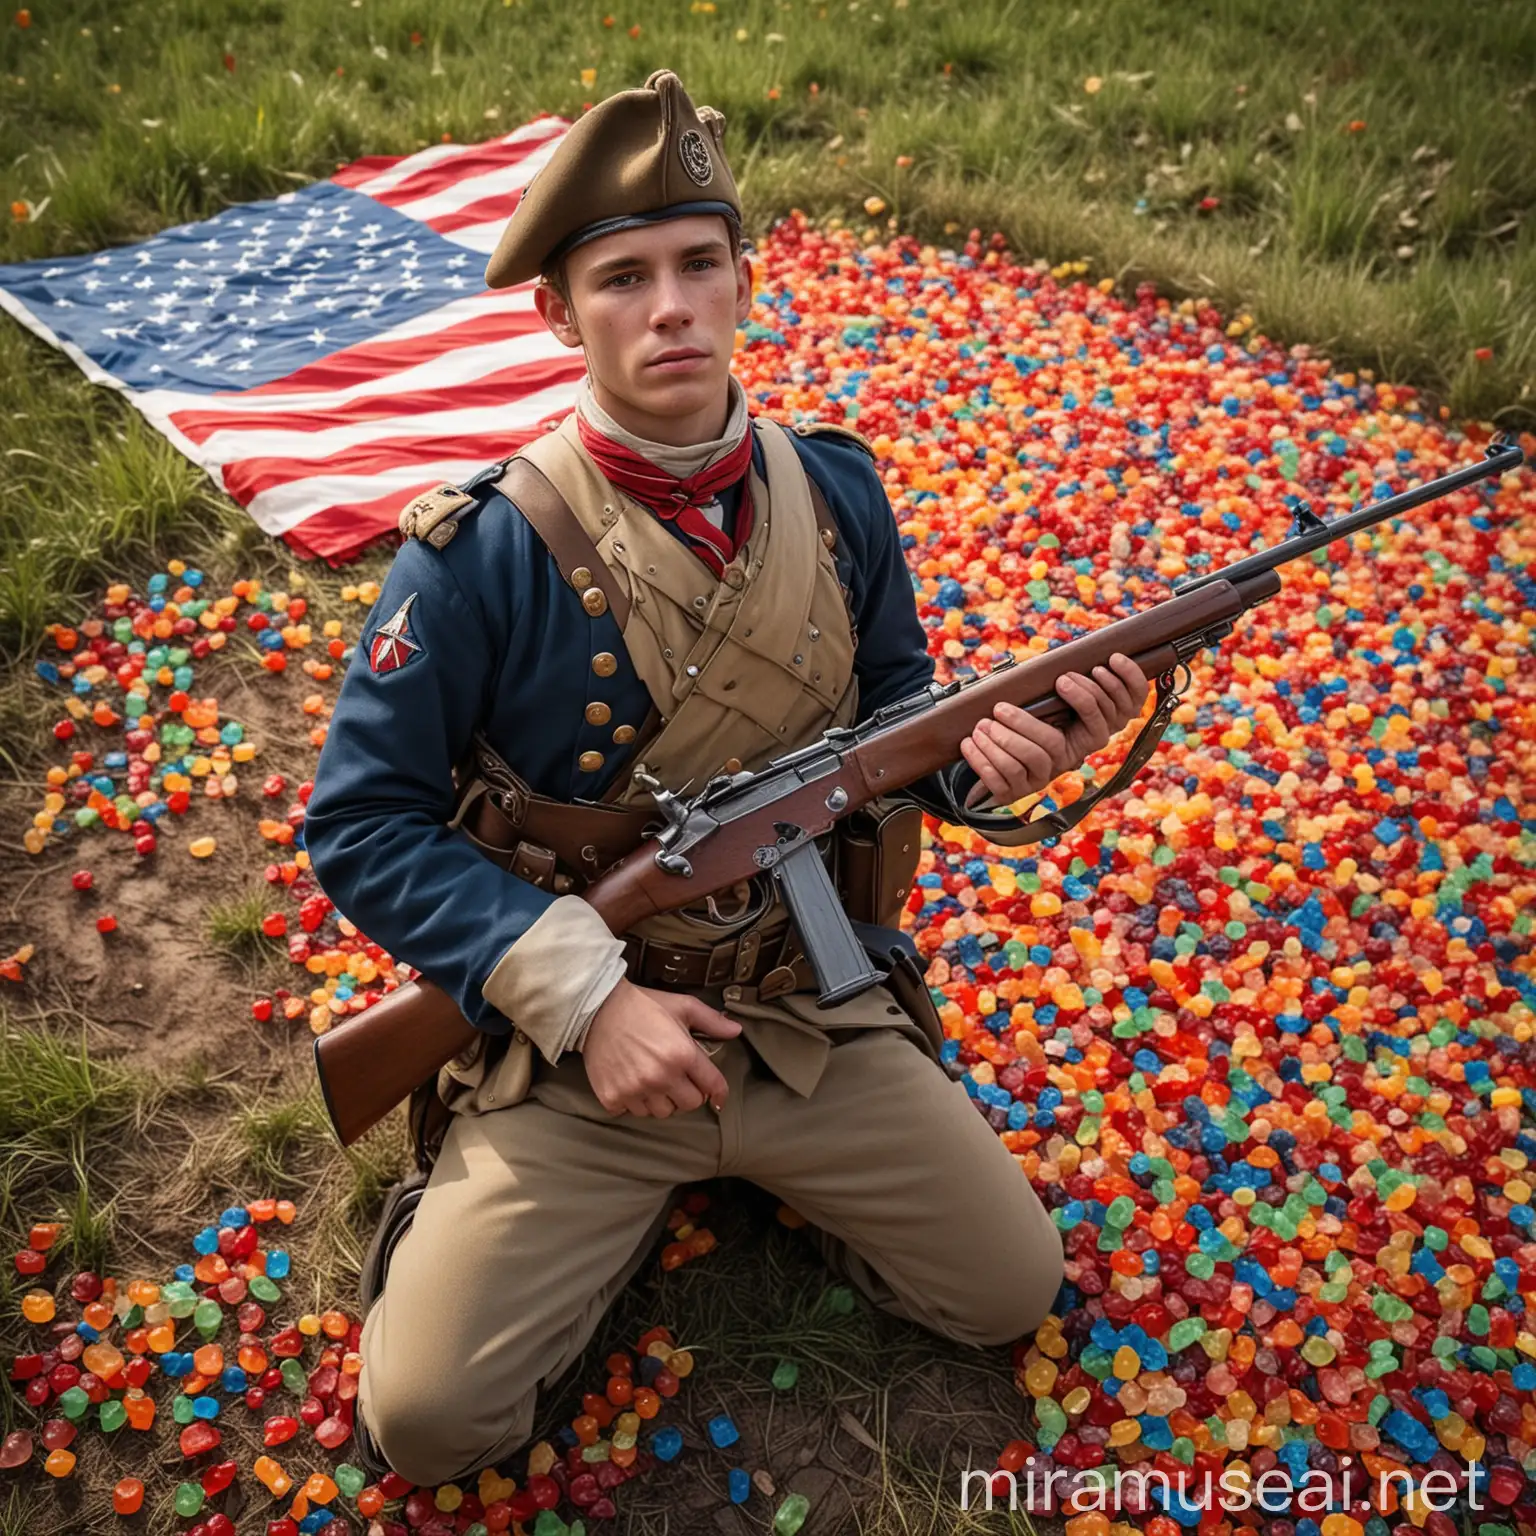 American Revolution War Soldier with Rifle Surrounded by Gummy Bears